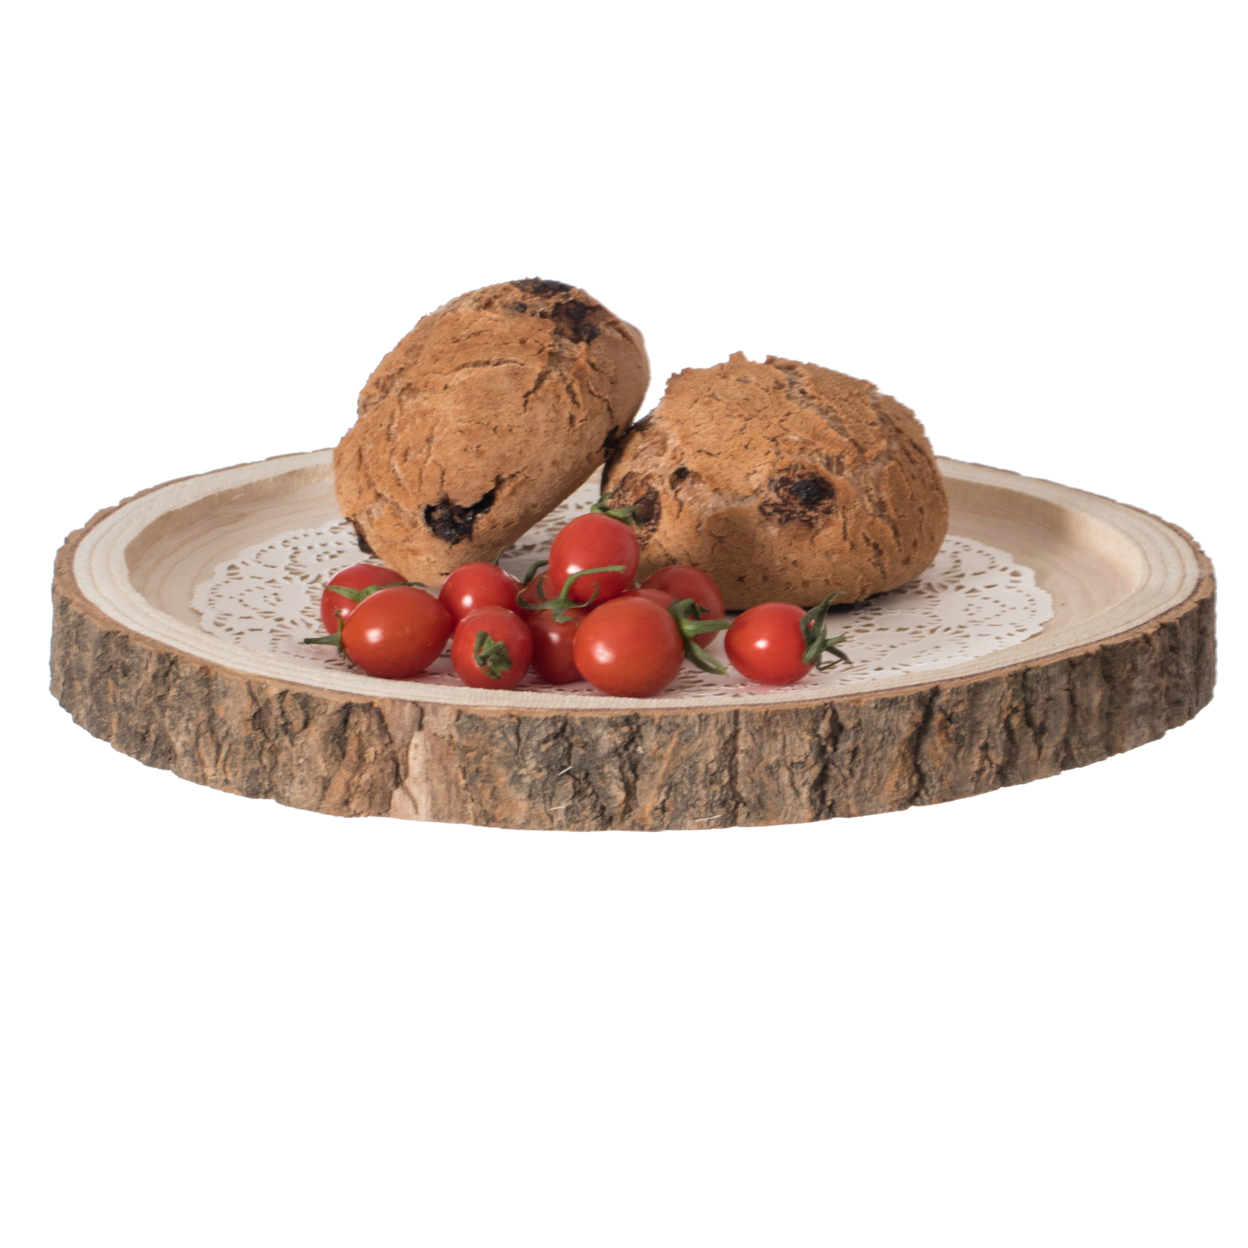 Natural Wooden Bark Round Slice Tray, Rustic Table Charger Centerpiece - 12